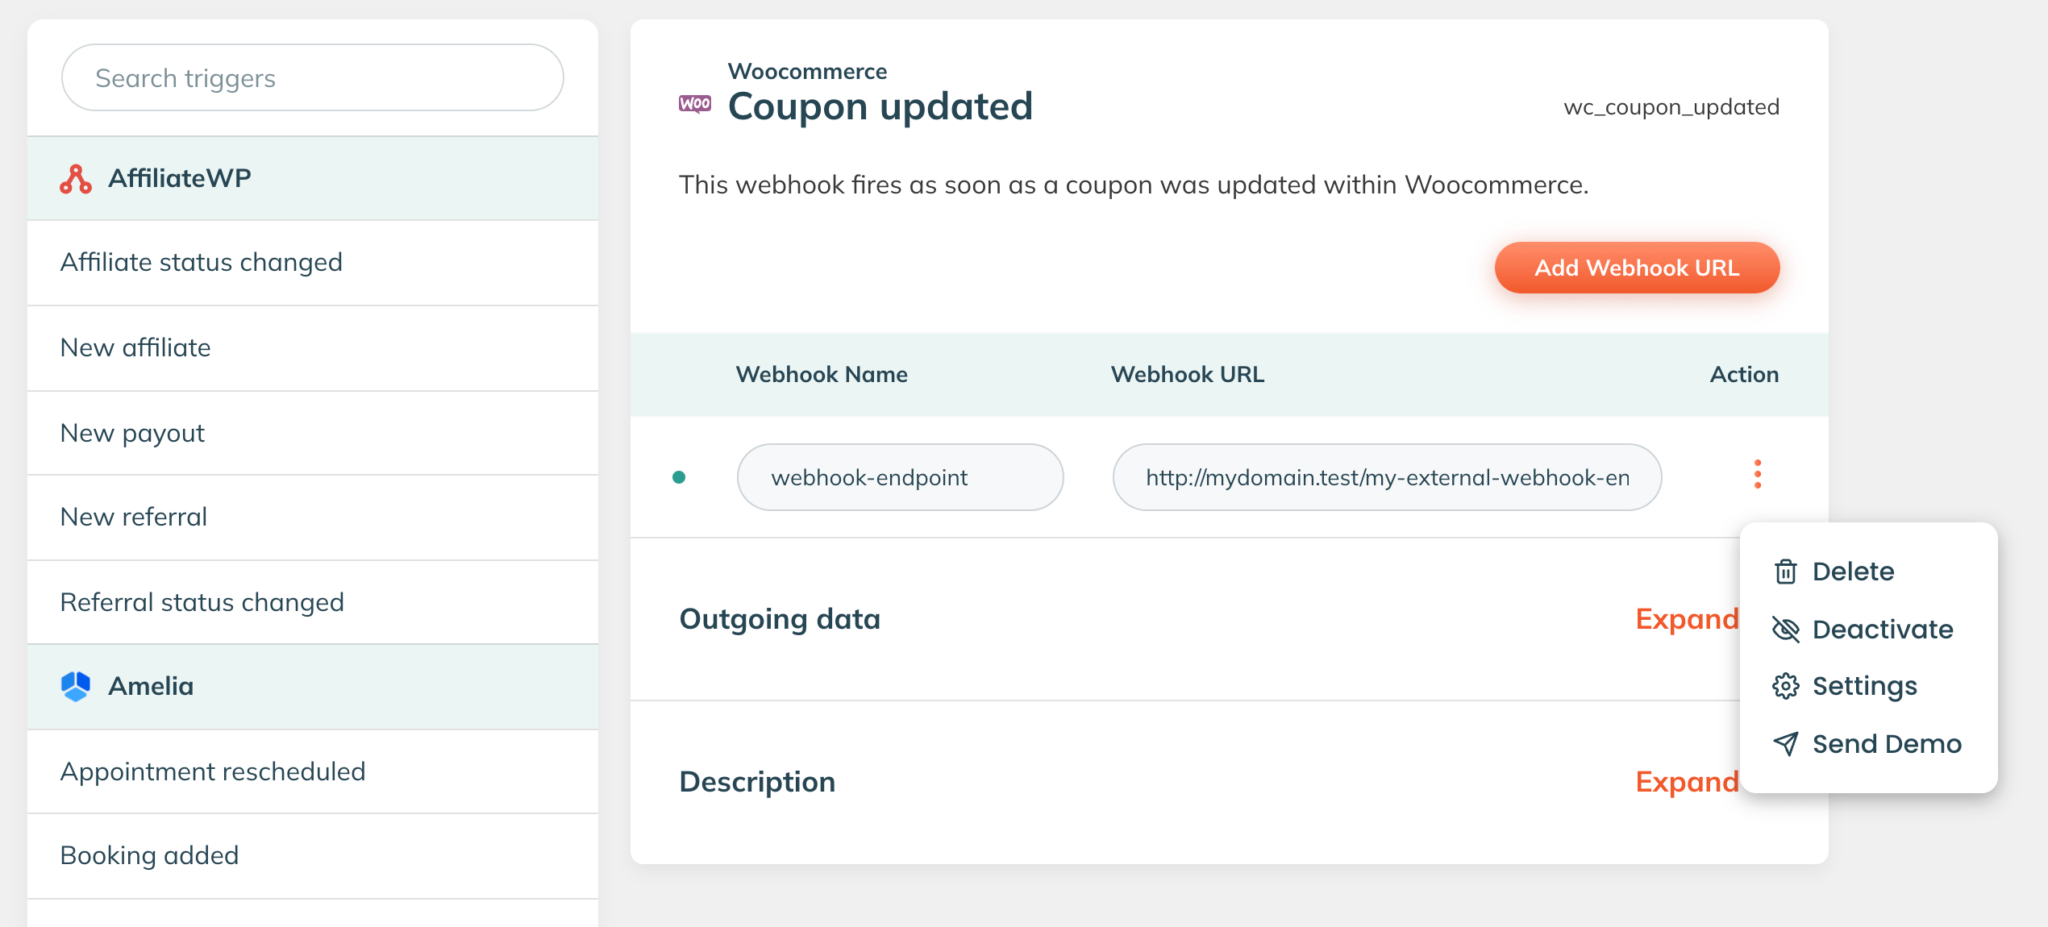 The WP Webhooks screen of the Course completed trigger